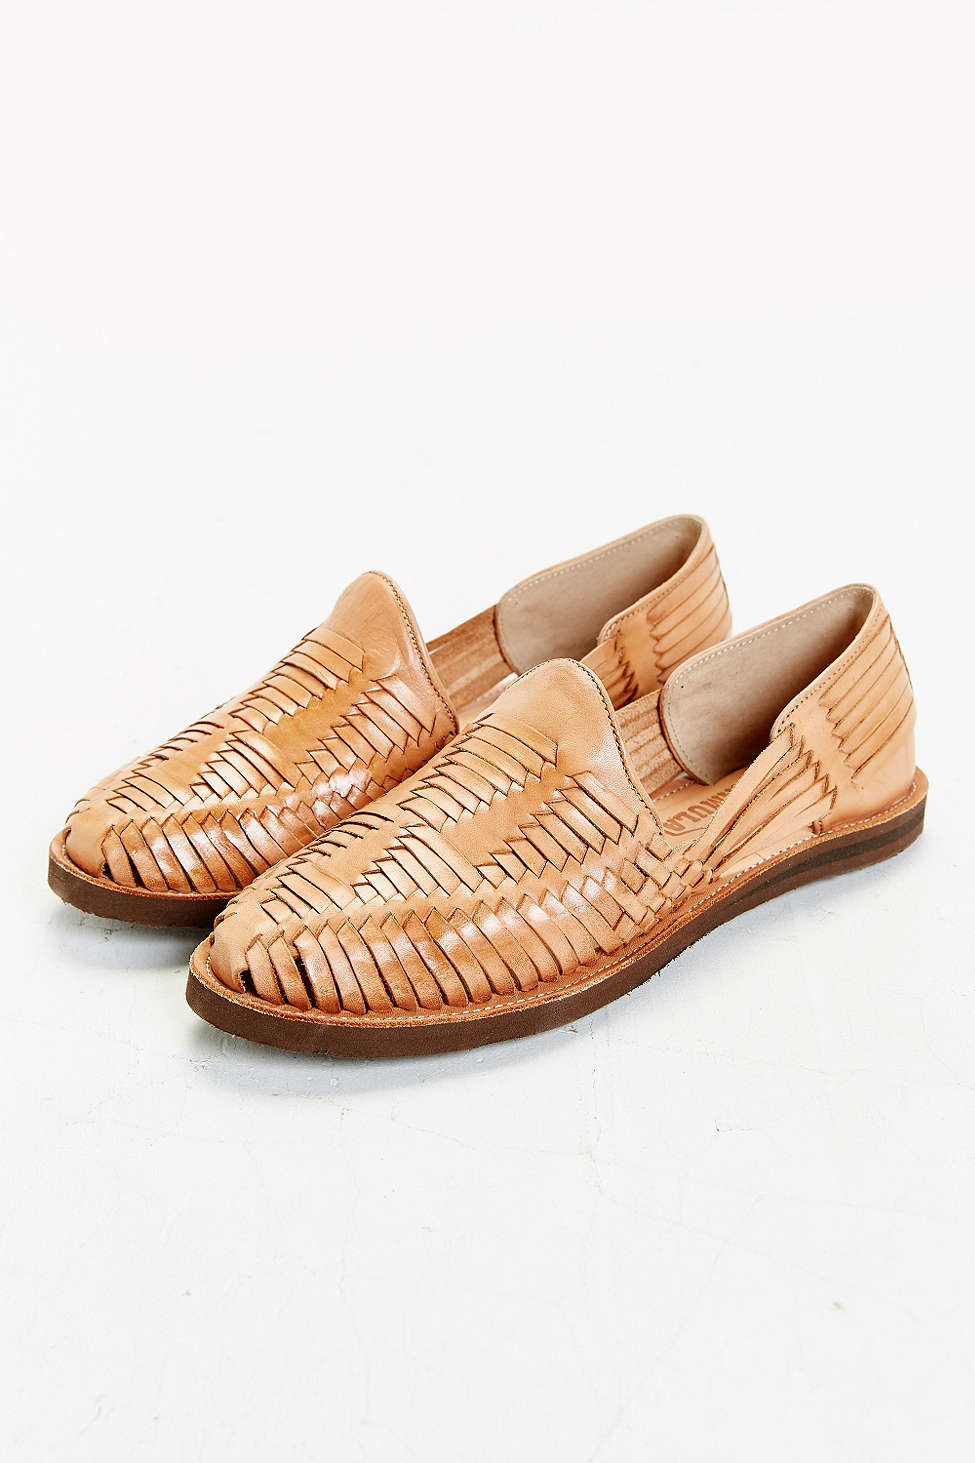 mens braided leather shoes